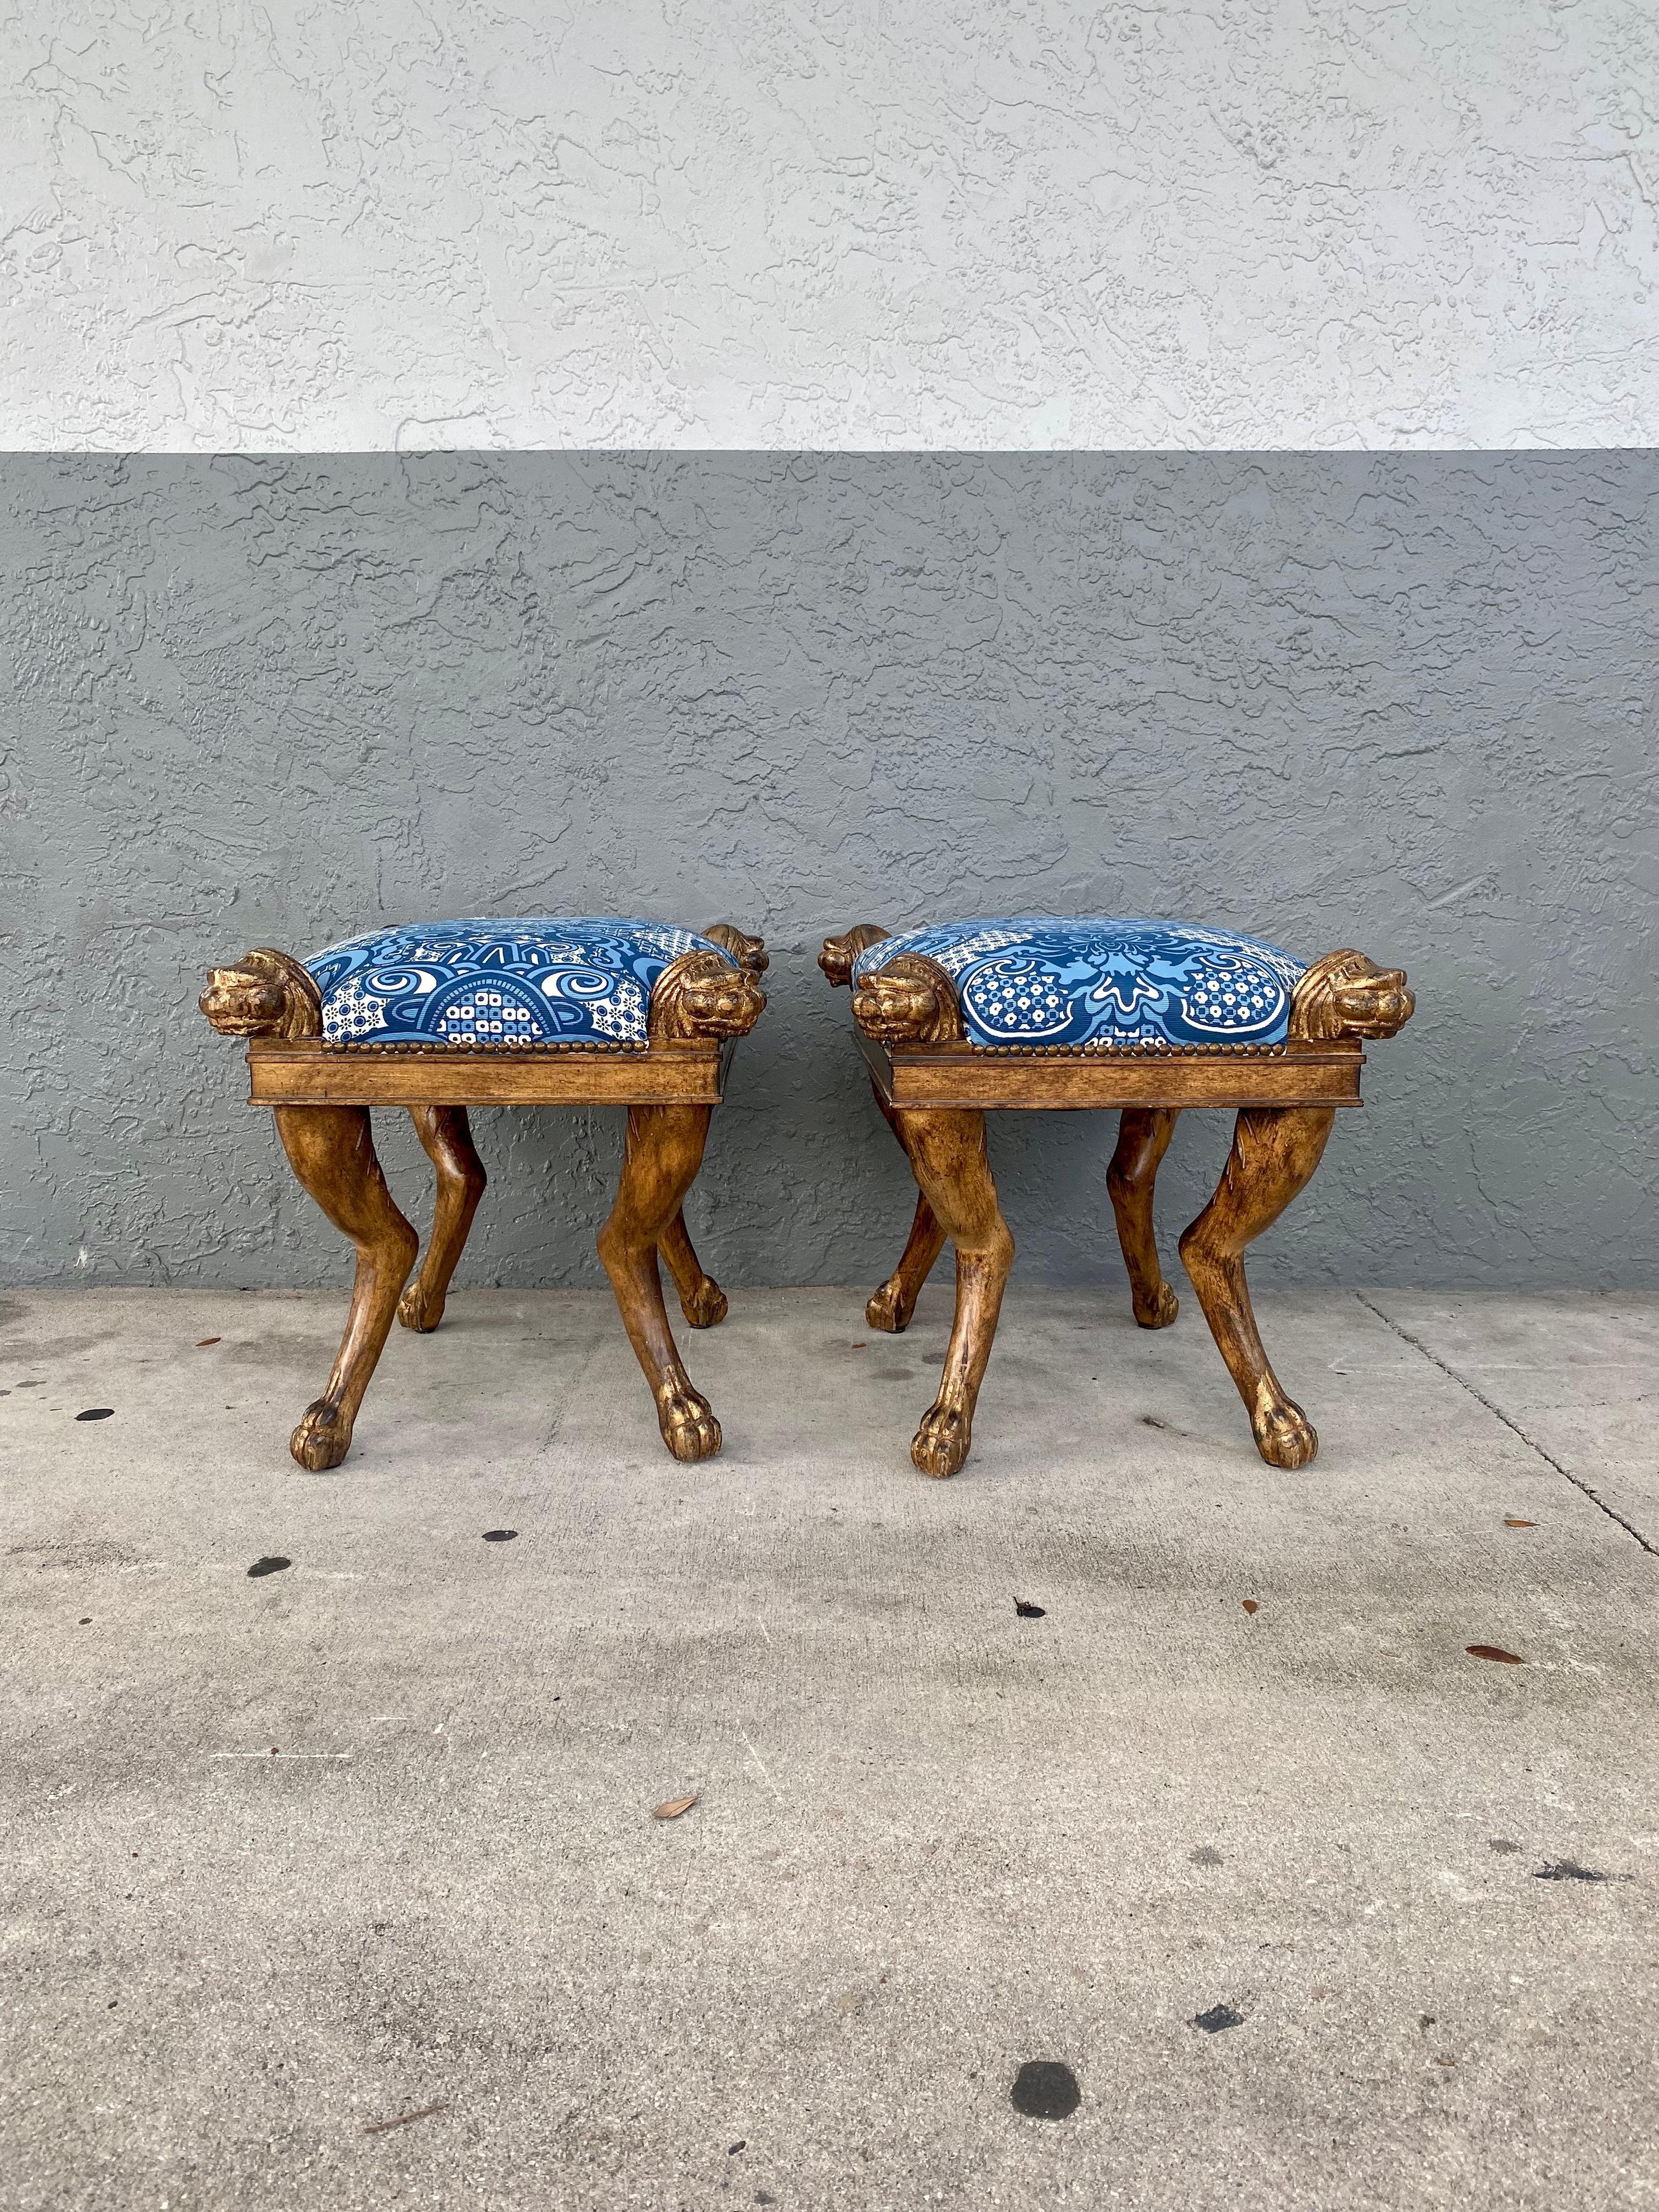 1960s Sculptural Carved Wood Lion Blue and White Bench Ottoman Stool In Good Condition For Sale In Fort Lauderdale, FL